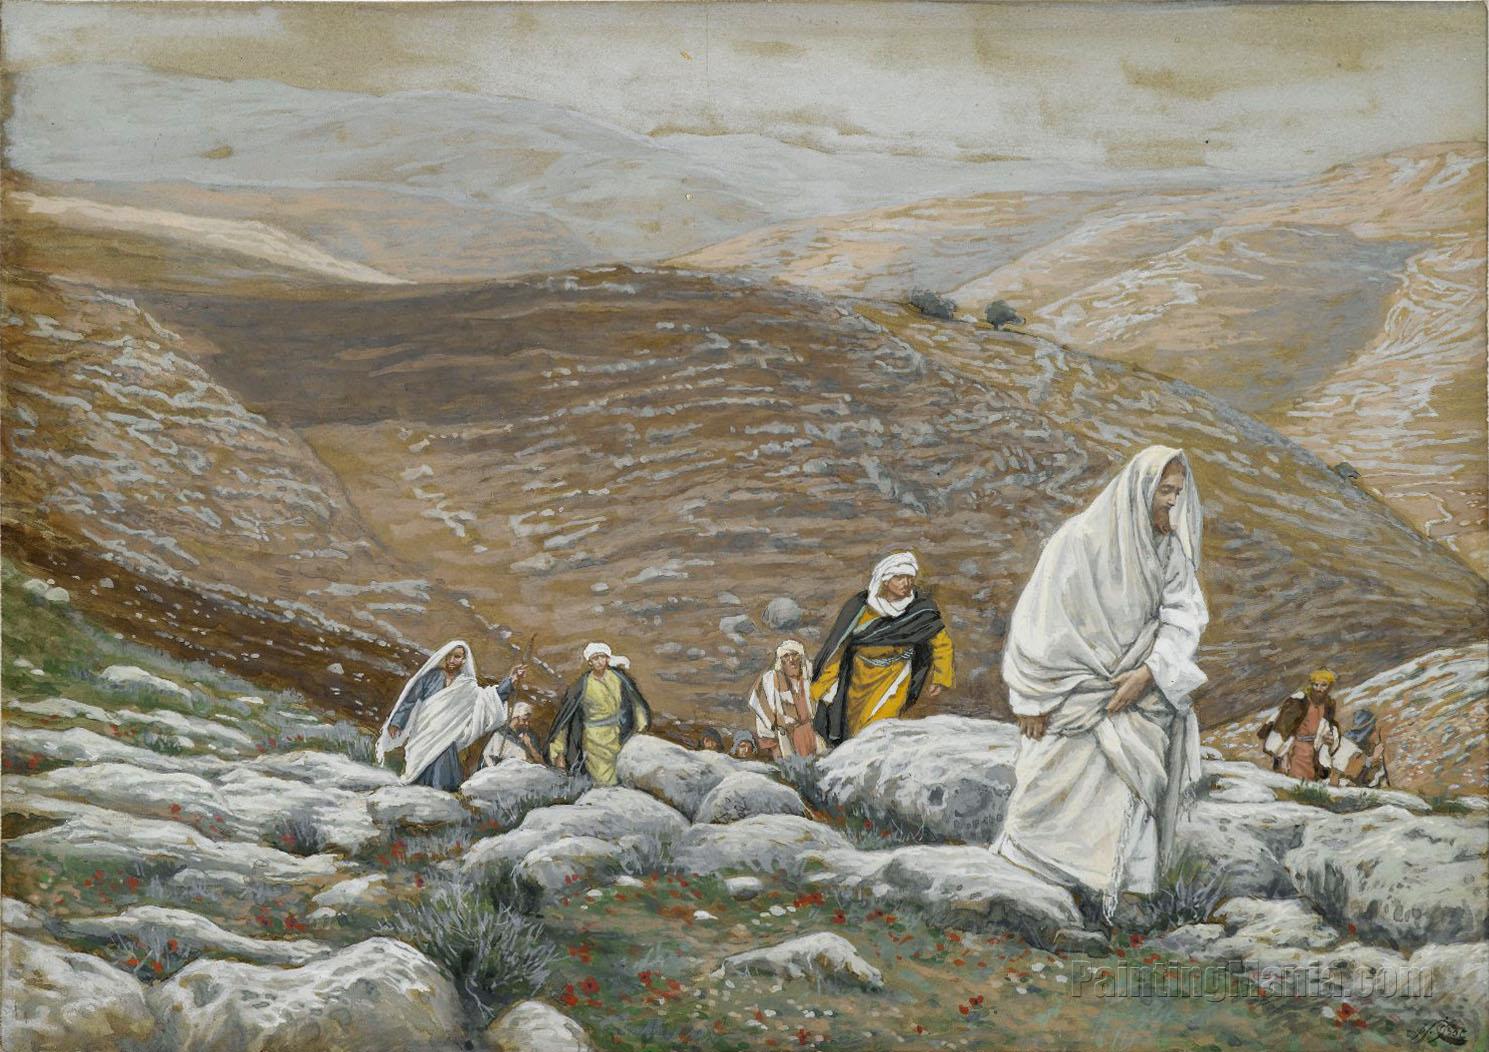 With Passover Approaching, Jesus Goes Up to Jerusalem